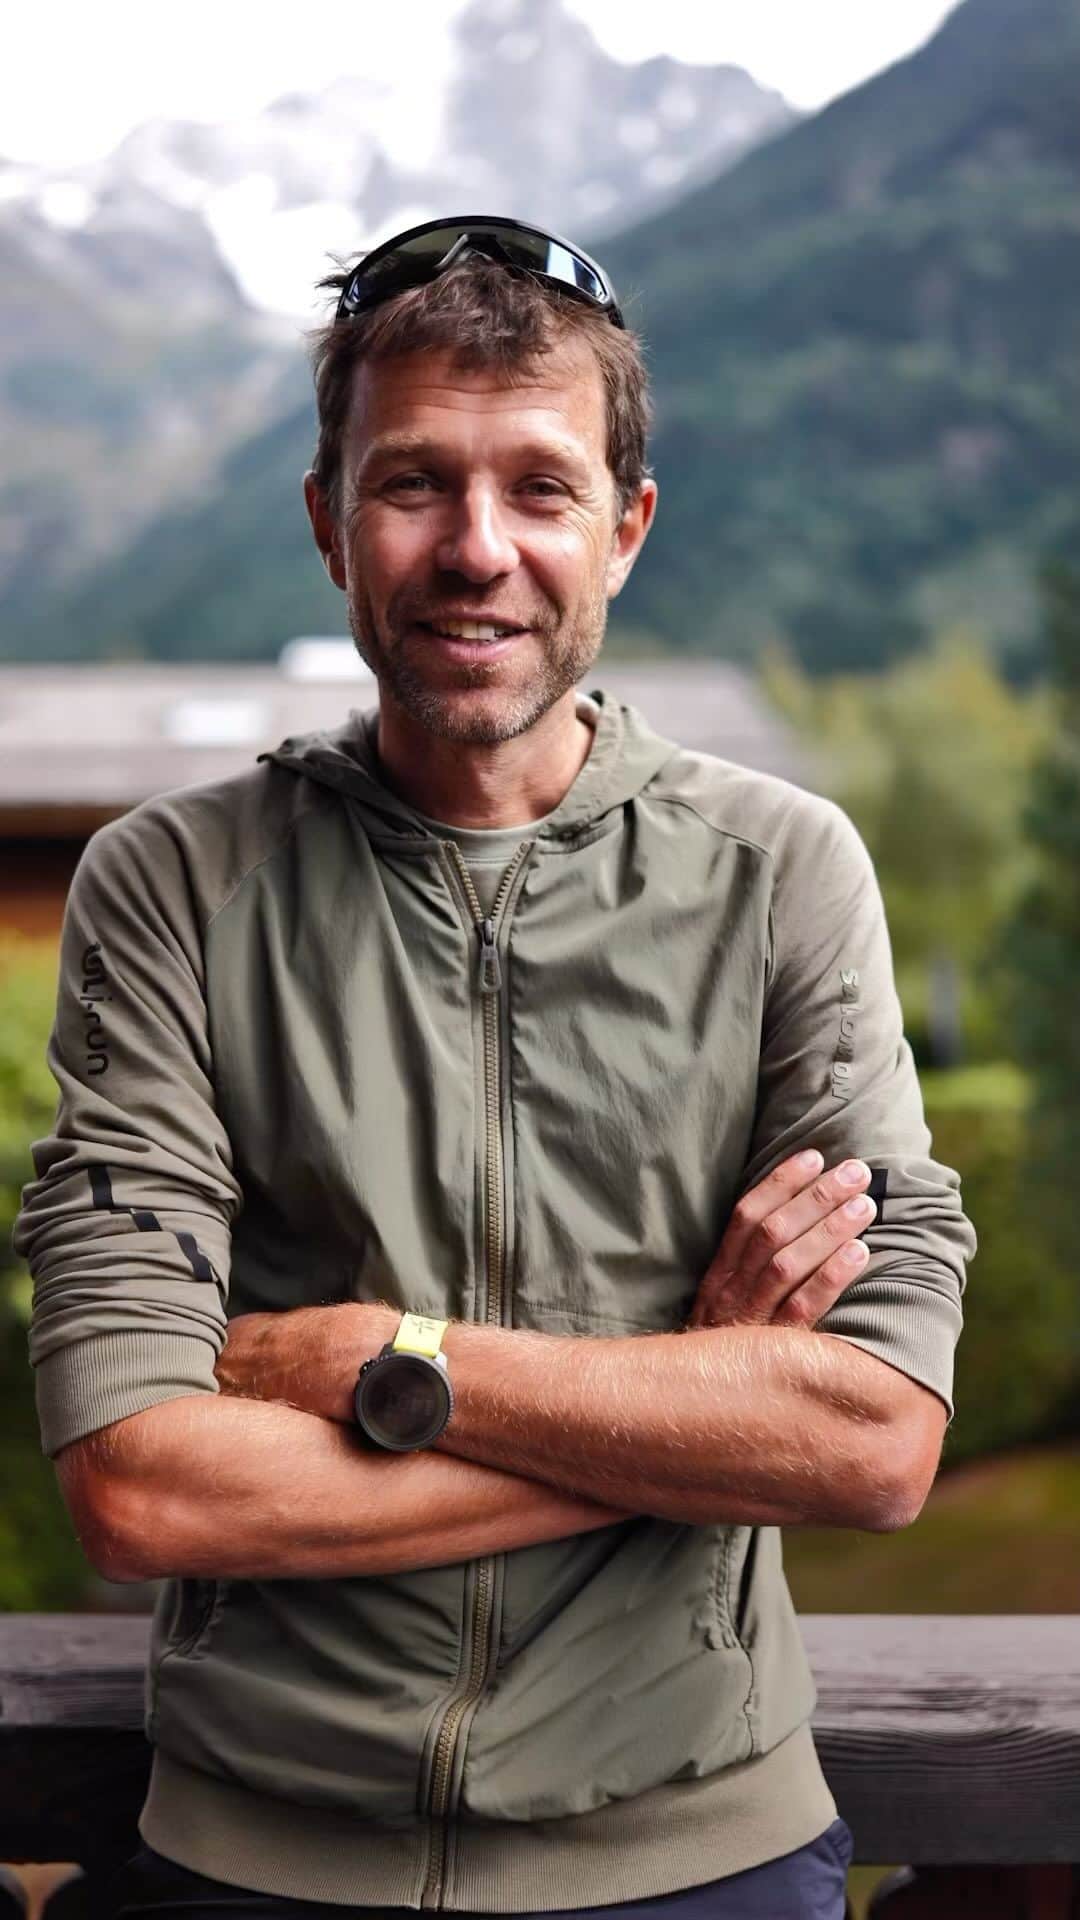 Suuntoのインスタグラム：「4-time UTMB champion @francois_dhaene has some wise words for the athletes running the 170km race around Mont Blanc today: focus on yourself, be careful at night and (try to) enjoy! 👍👊👏  @utmbmontblanc  #UTMB #Suunto #AdventureStartsHere  🎥 @the.adventure.bakery」